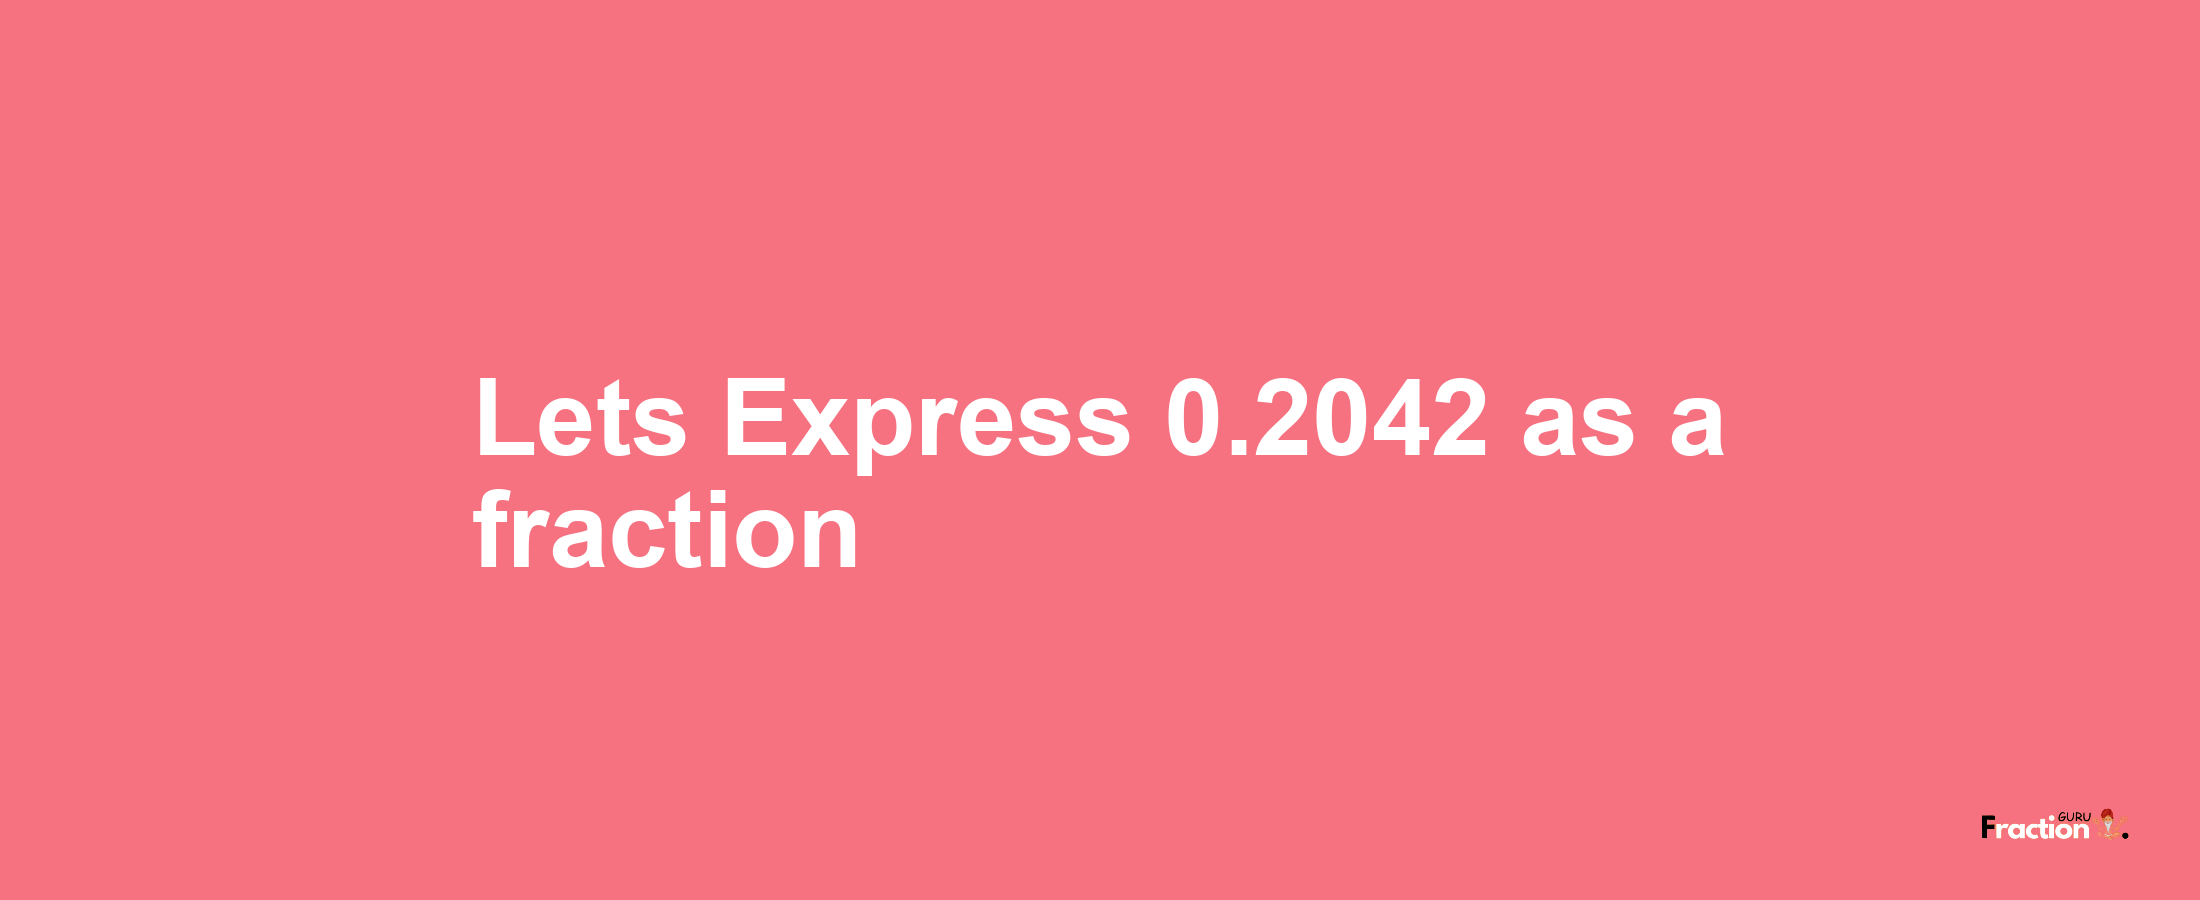 Lets Express 0.2042 as afraction